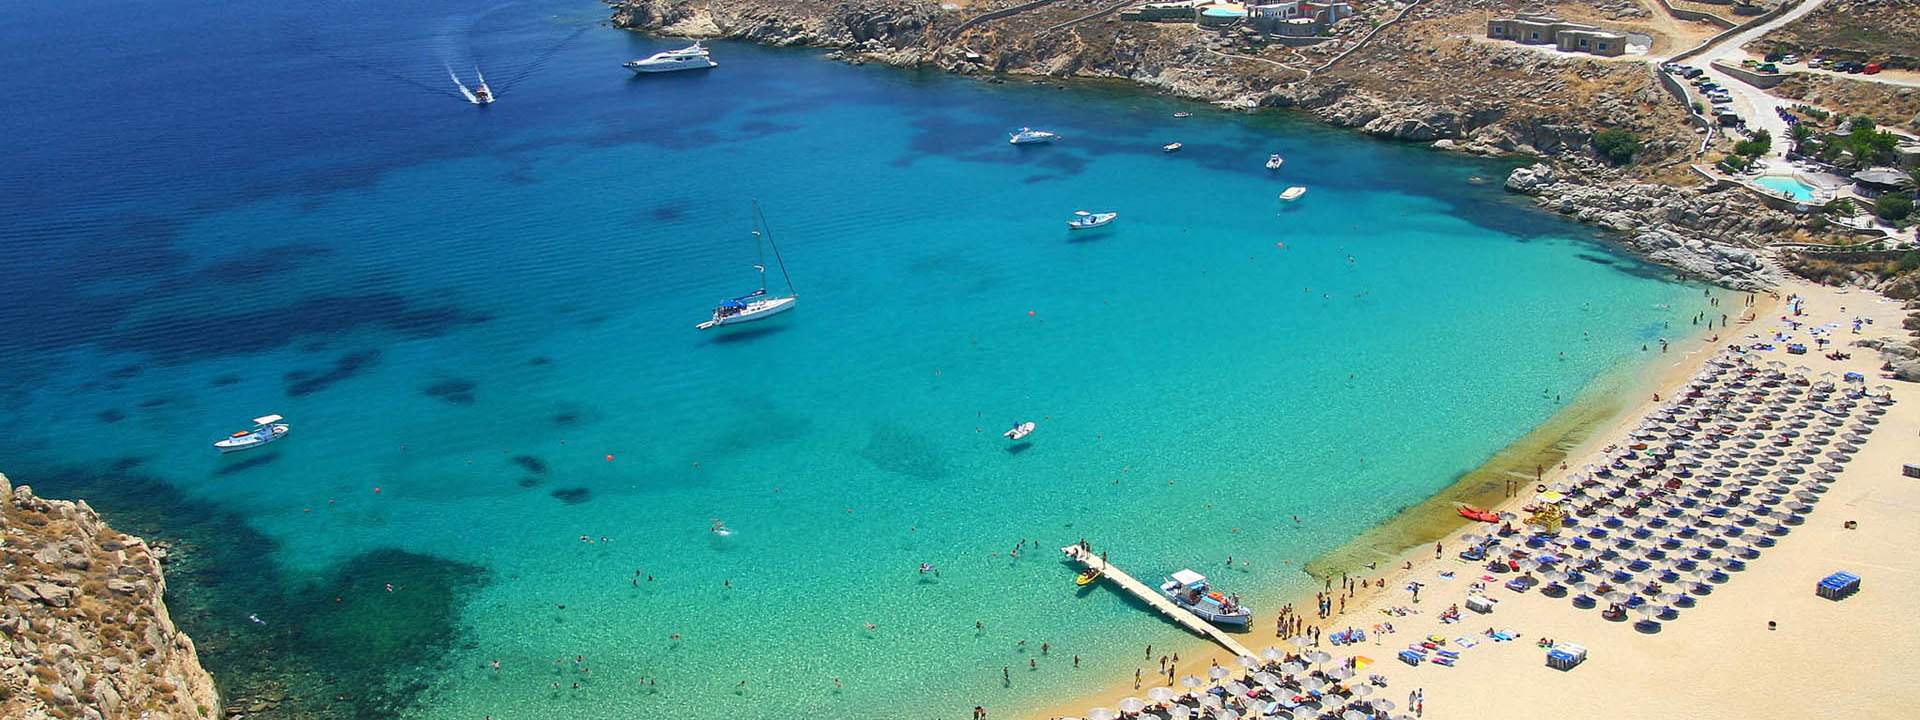 From Santorini to Mykonos, discover the most ravishing beaches of Greece